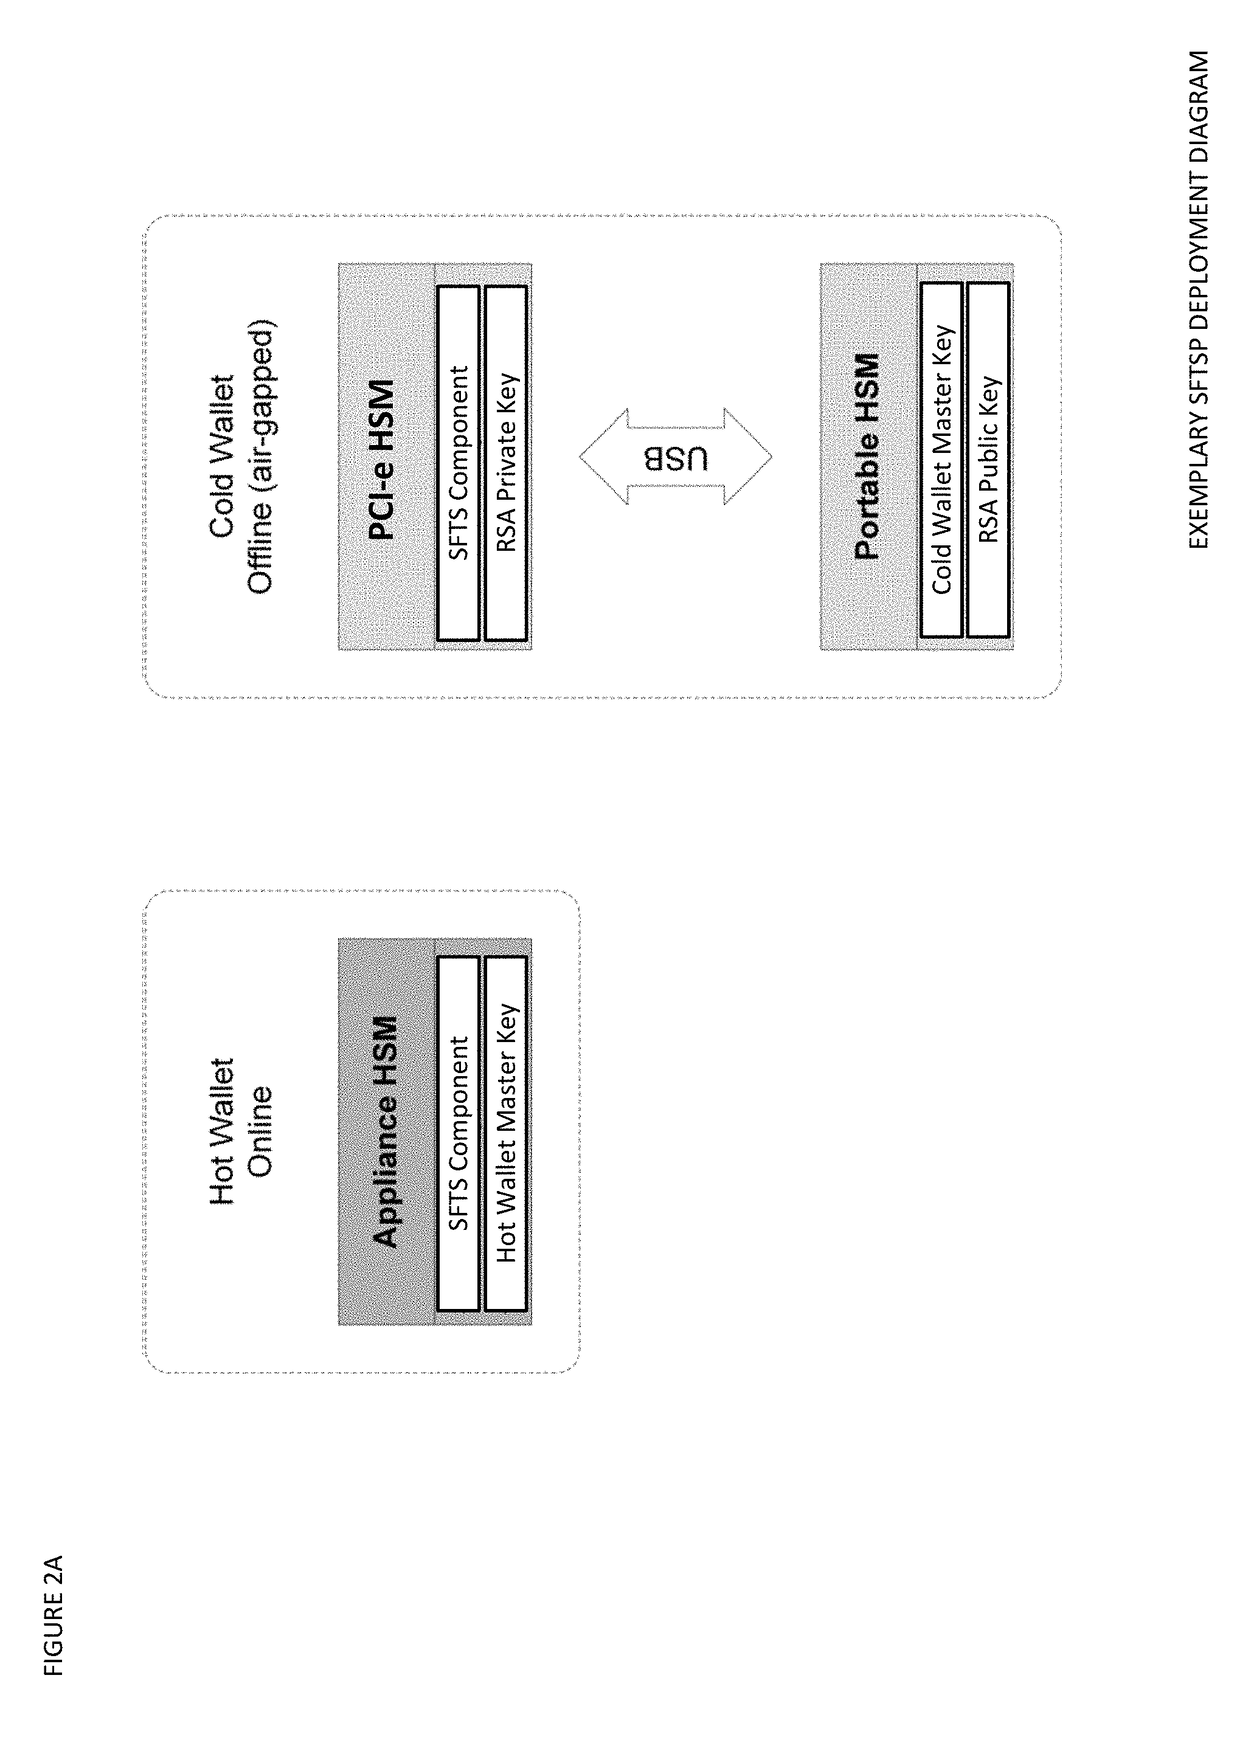 Seed splitting and firmware extension for secure cryptocurrency key backup, restore, and transaction signing platform apparatuses, methods and systems